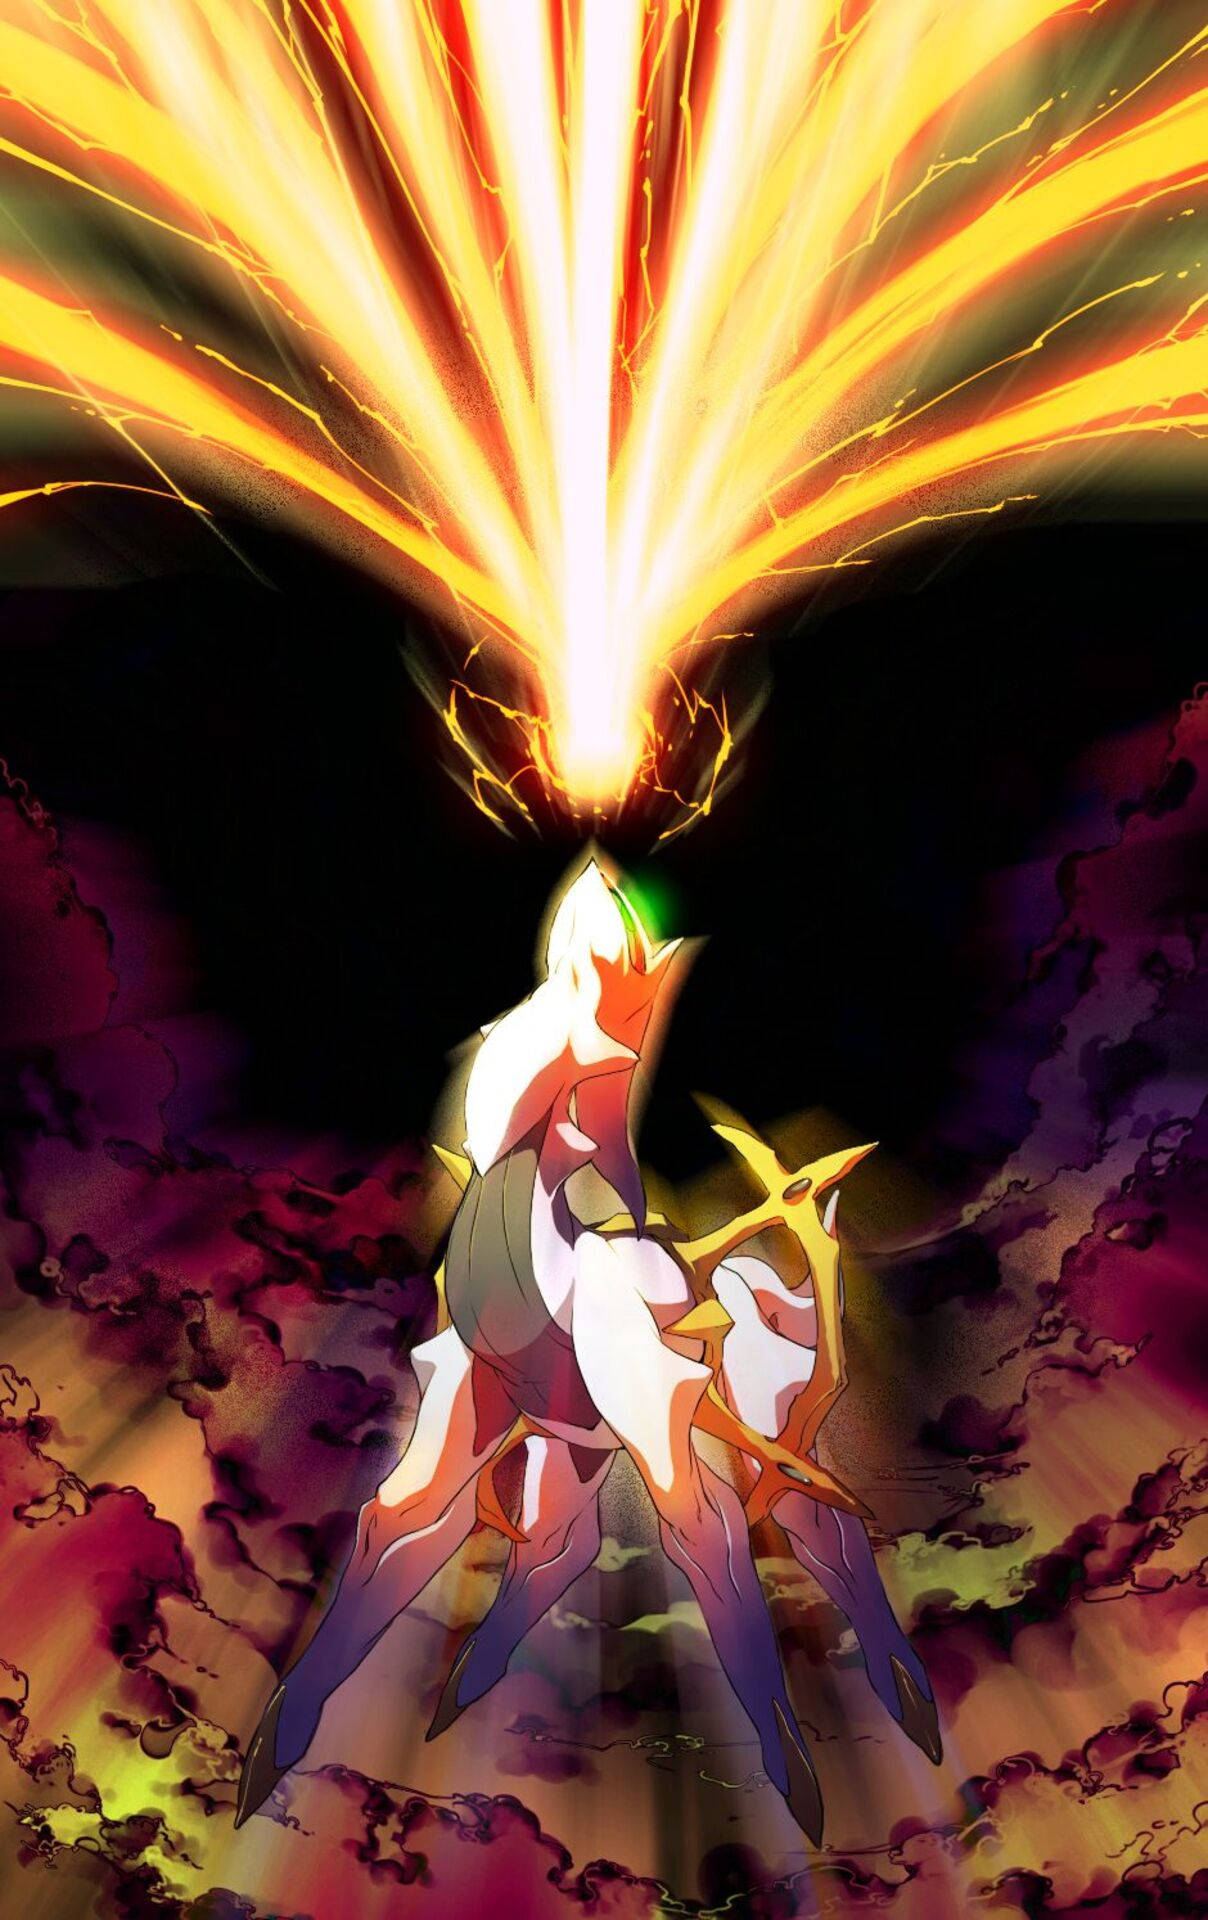 Unleash the power of Arceus and its Fire-Type Explosion Wallpaper